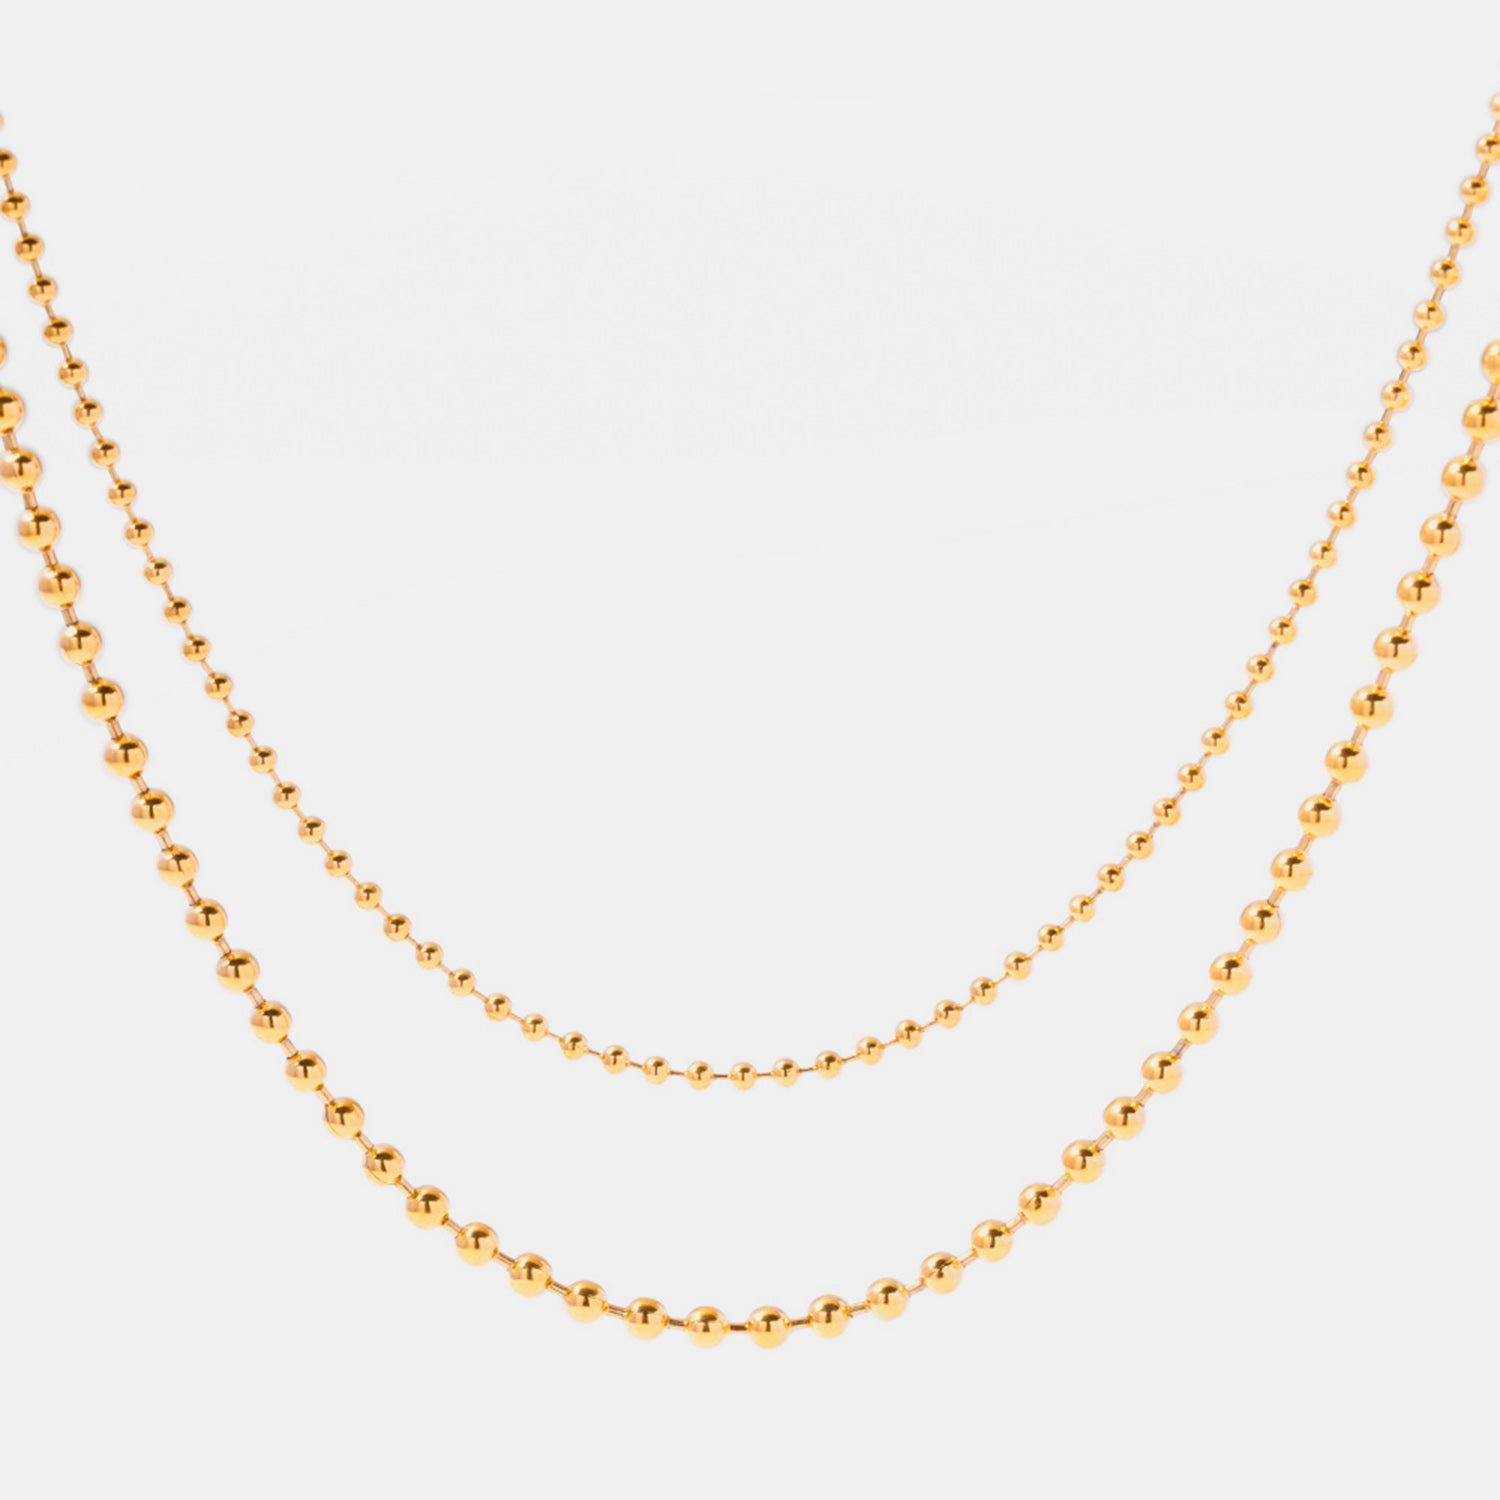 1# BEST Gold Layered Layering Chain Necklaces Bundle Jewelry Gift for Women | #1 Best Most Top Trendy Trending Aesthetic Yellow Gold Layered Layering Chain Necklace Jewelry Gift for Women, Girls, Girlfriend, Mother, Wife, Ladies | Mason & Madison Co.